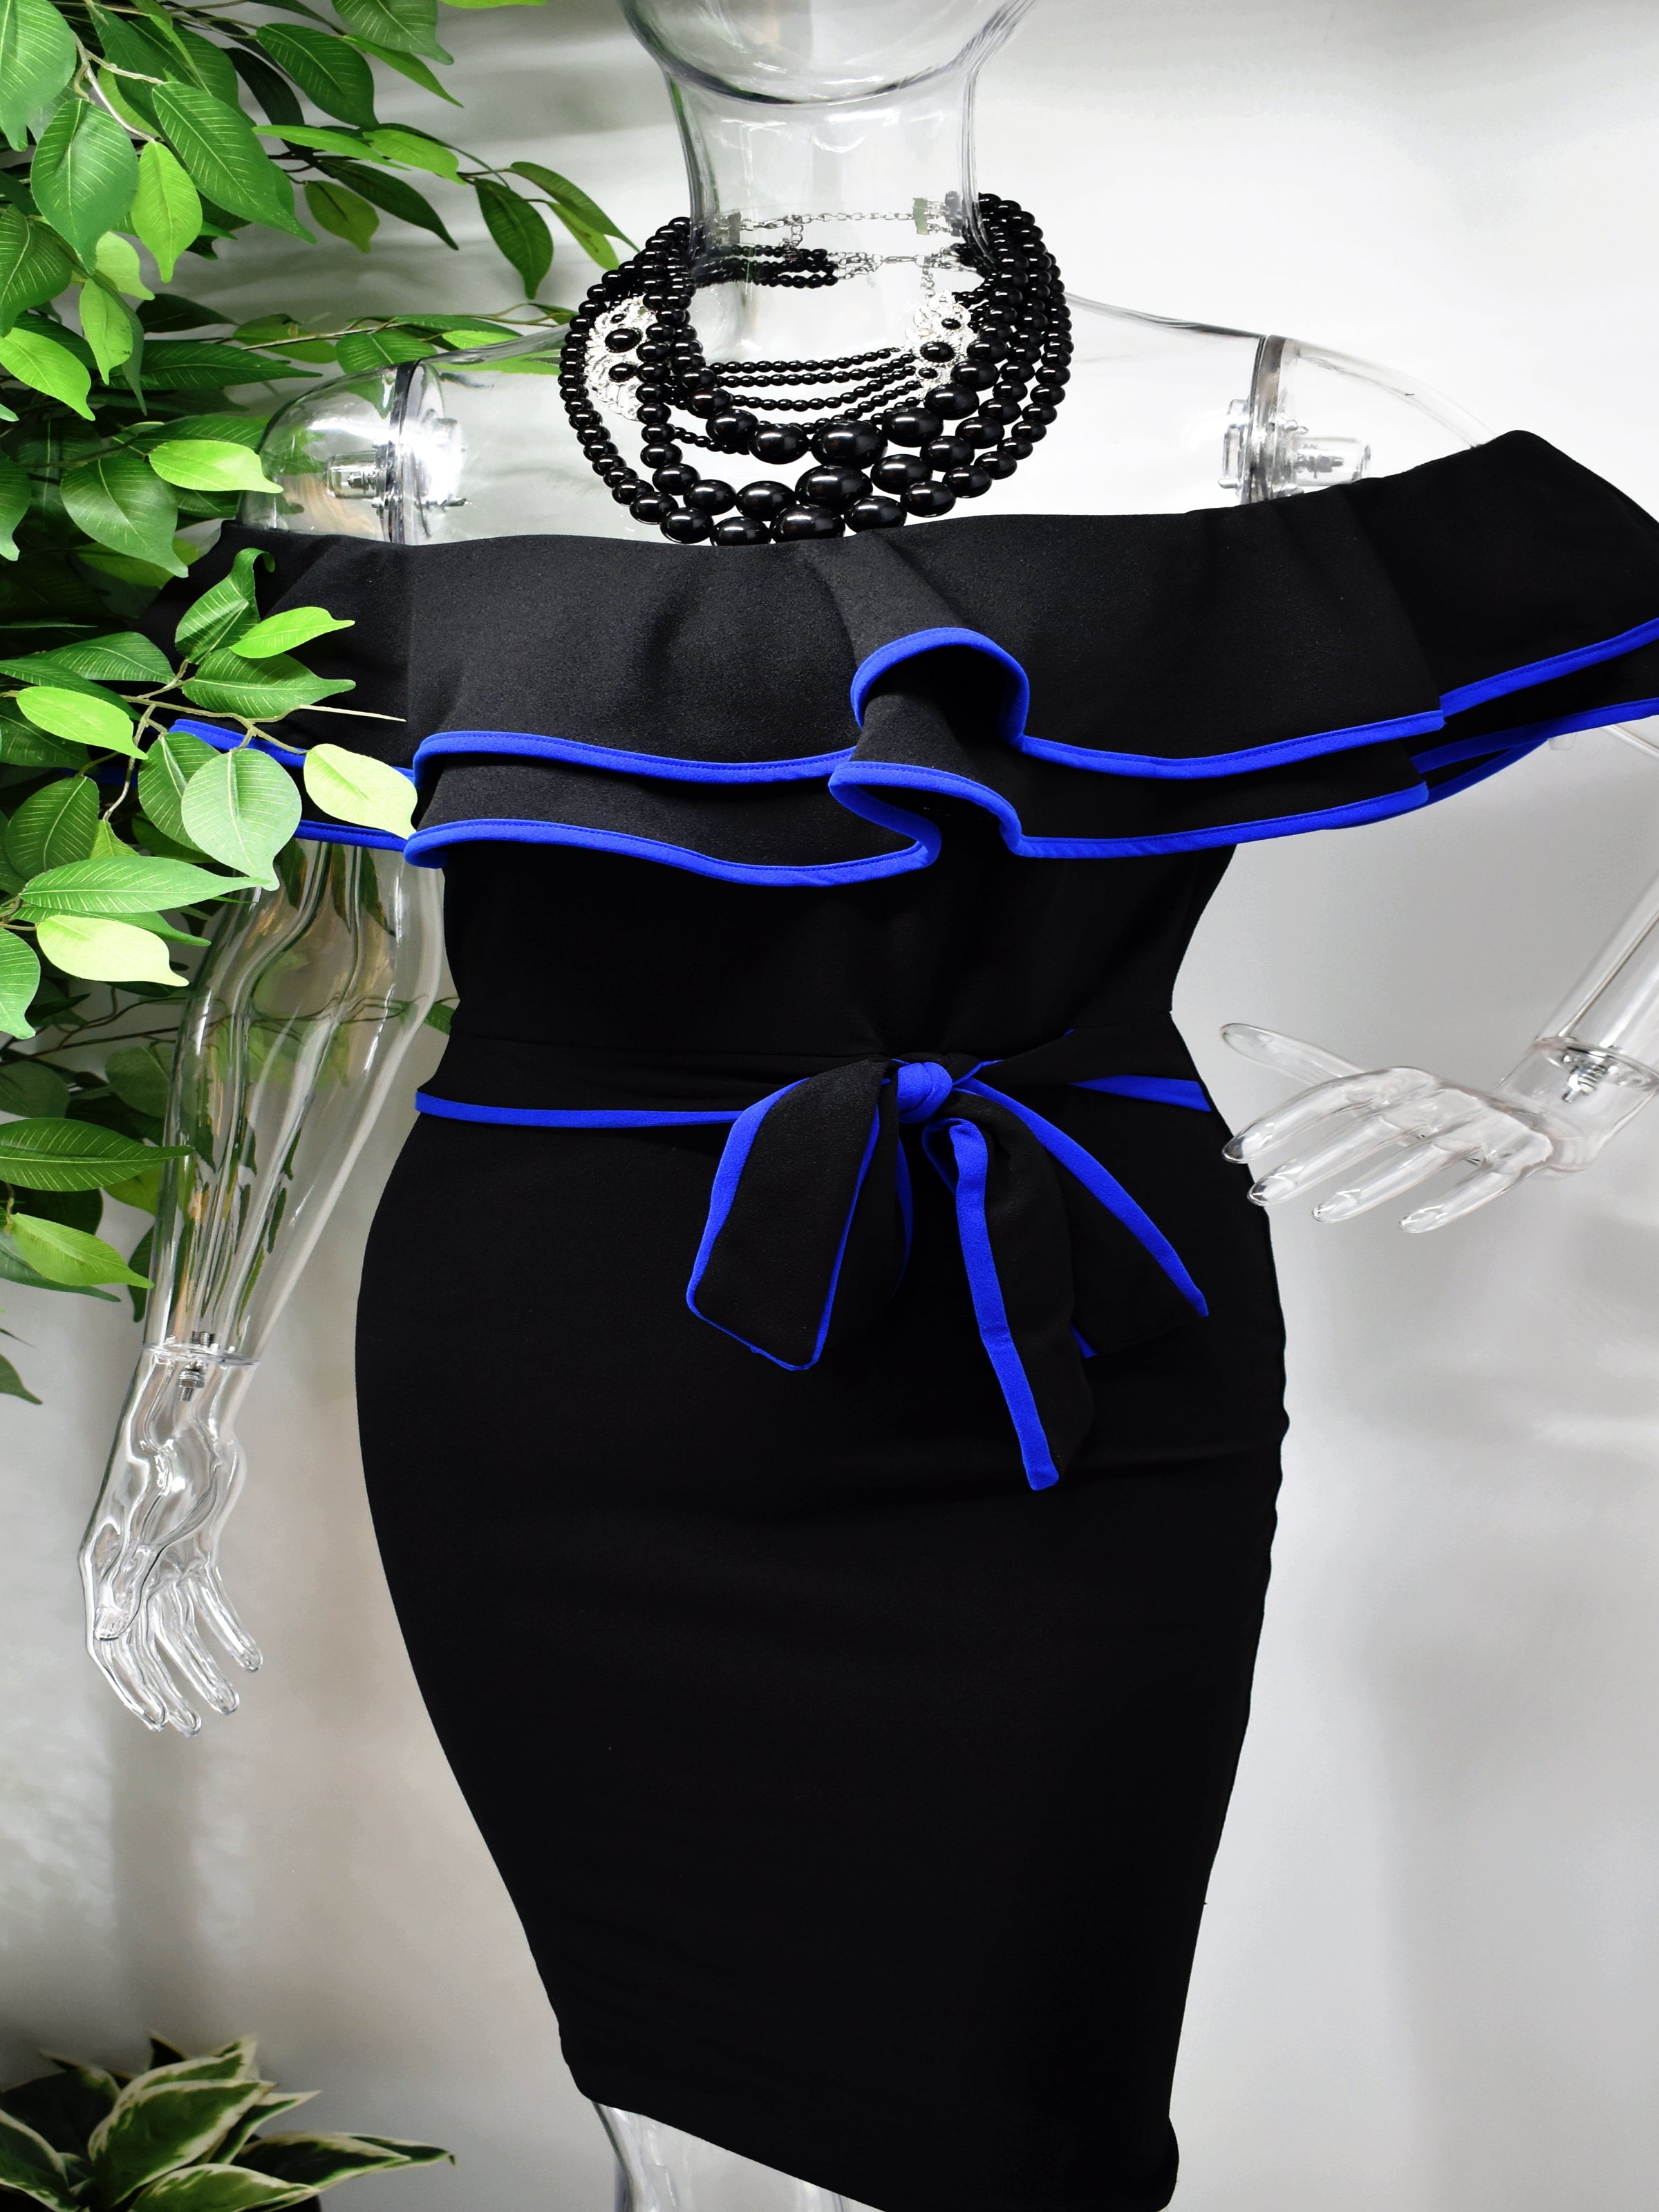 Our Berdine Black Midi Dress is picture perfect with its off the shoulder ruffled neckline and fitted bodice. The ruffled neckline and belted waist is piped with a beautiful blue.